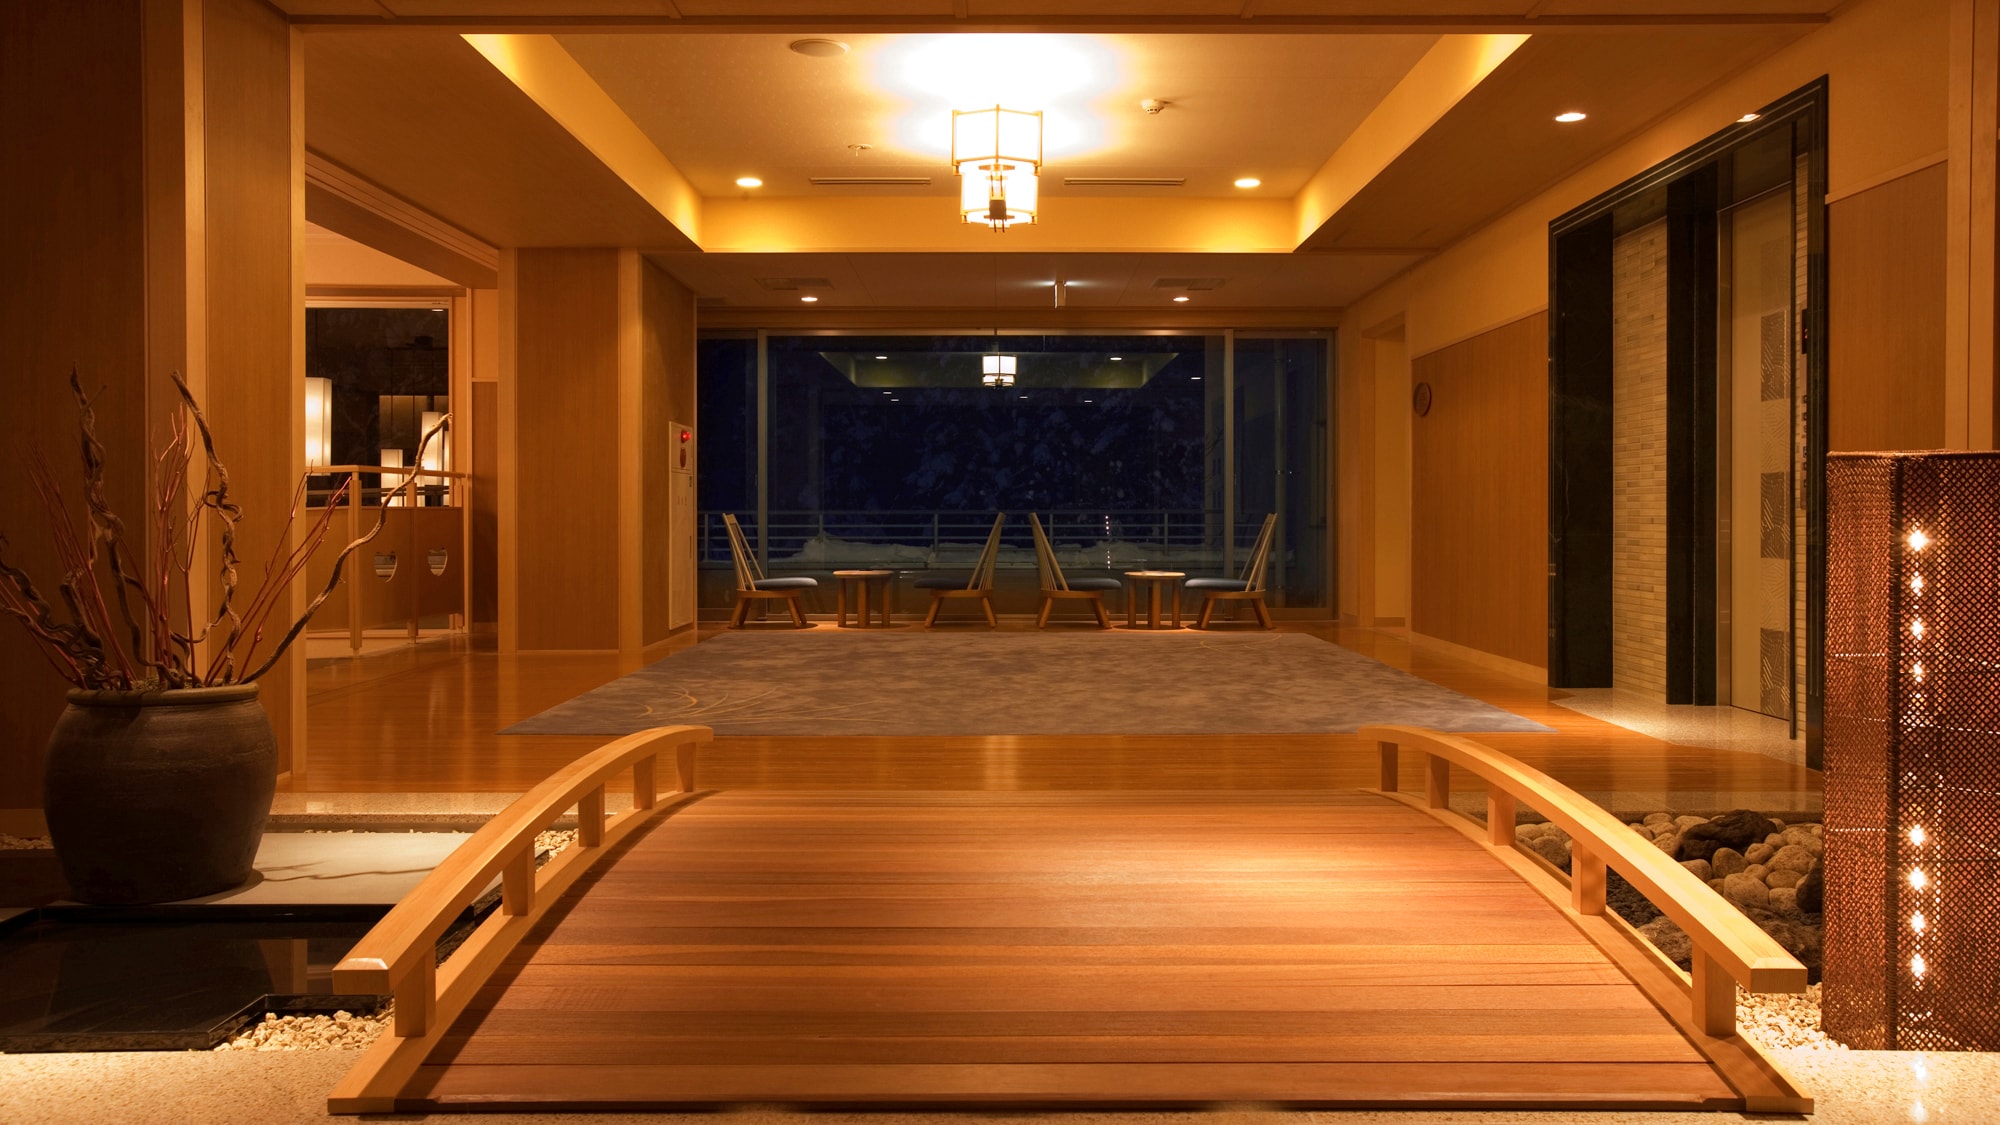 Elevator hall - A space where you can feel the four seasons through the large windows